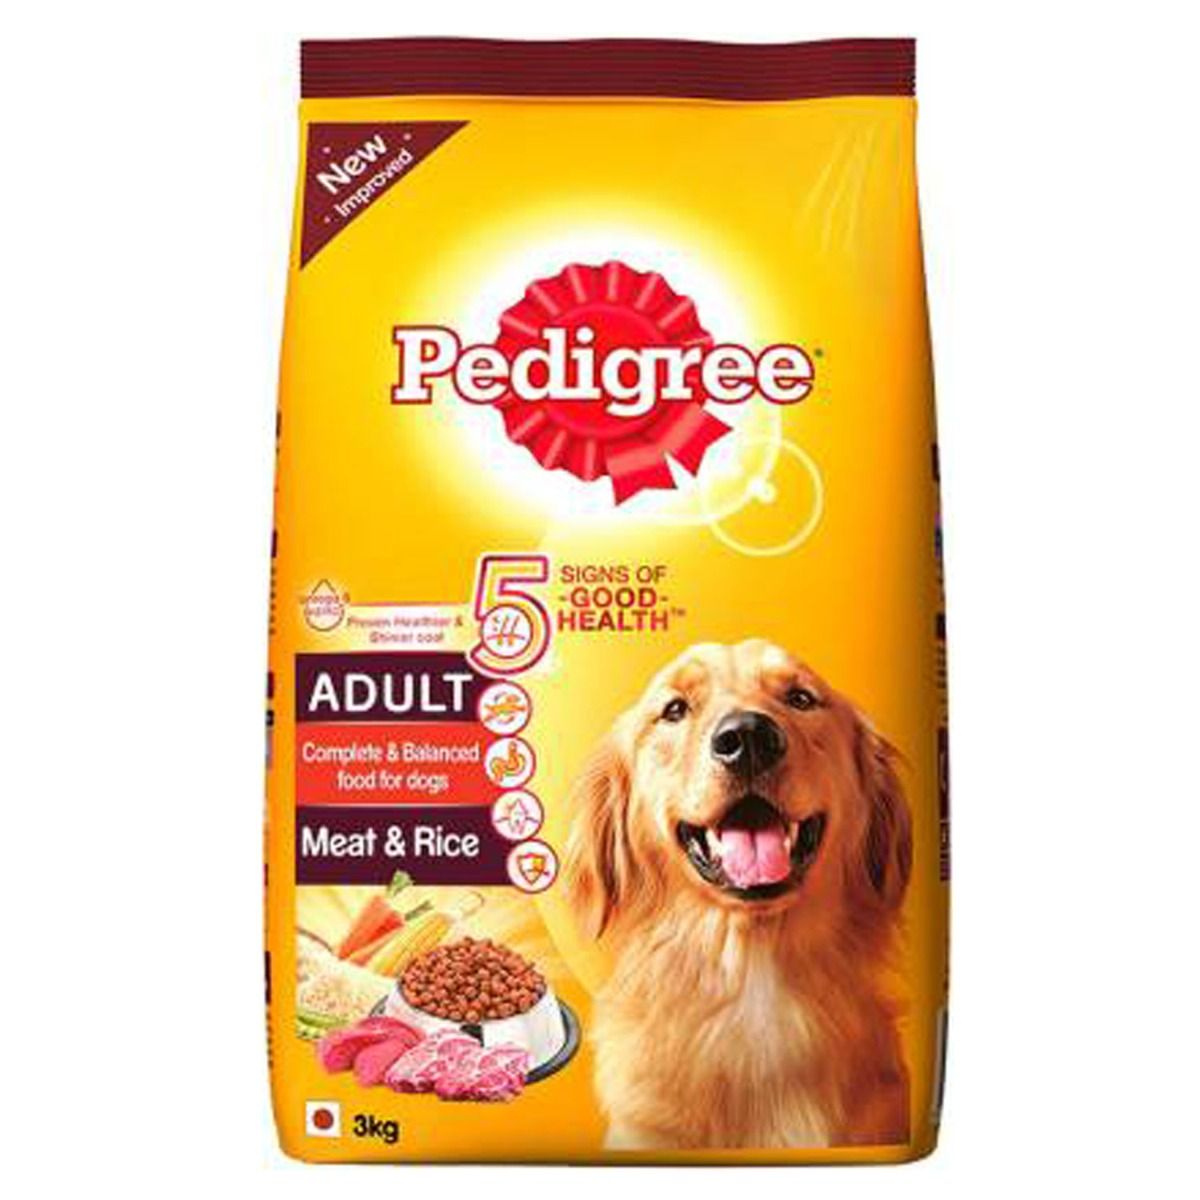 Buy Pedigree Adult Dog Food With Meat & Rice, 3 kg Online